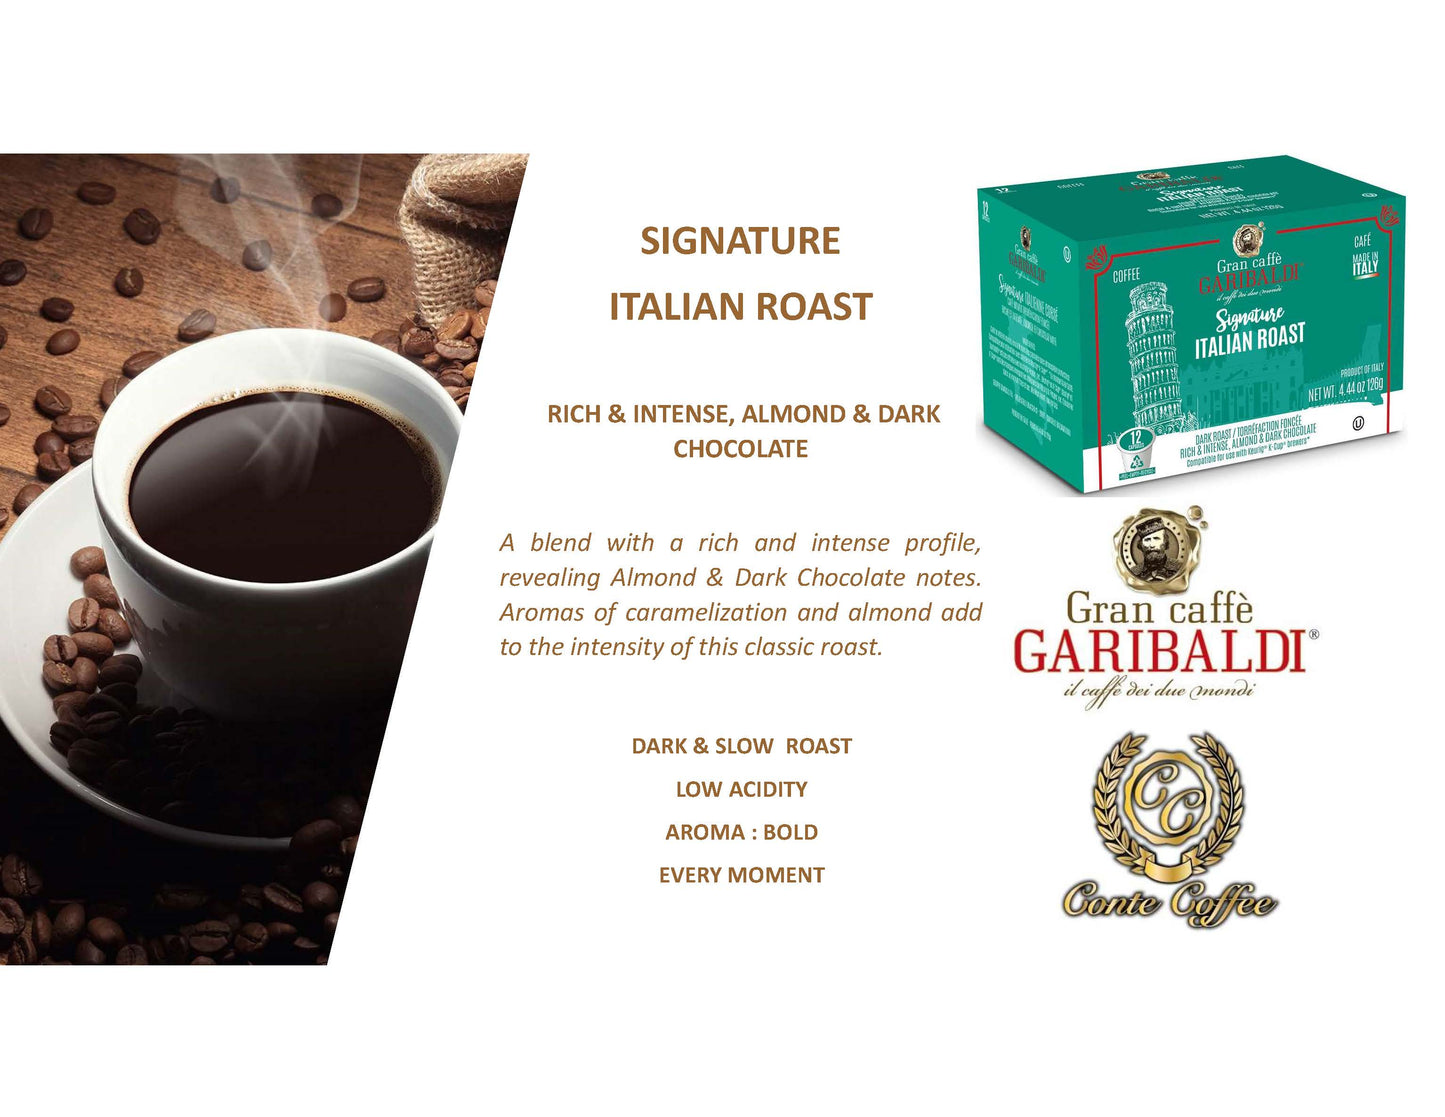 Caffè Garibaldi's Single Serve Recyclable Coffee Pods for Keurig K-Cup Brewers